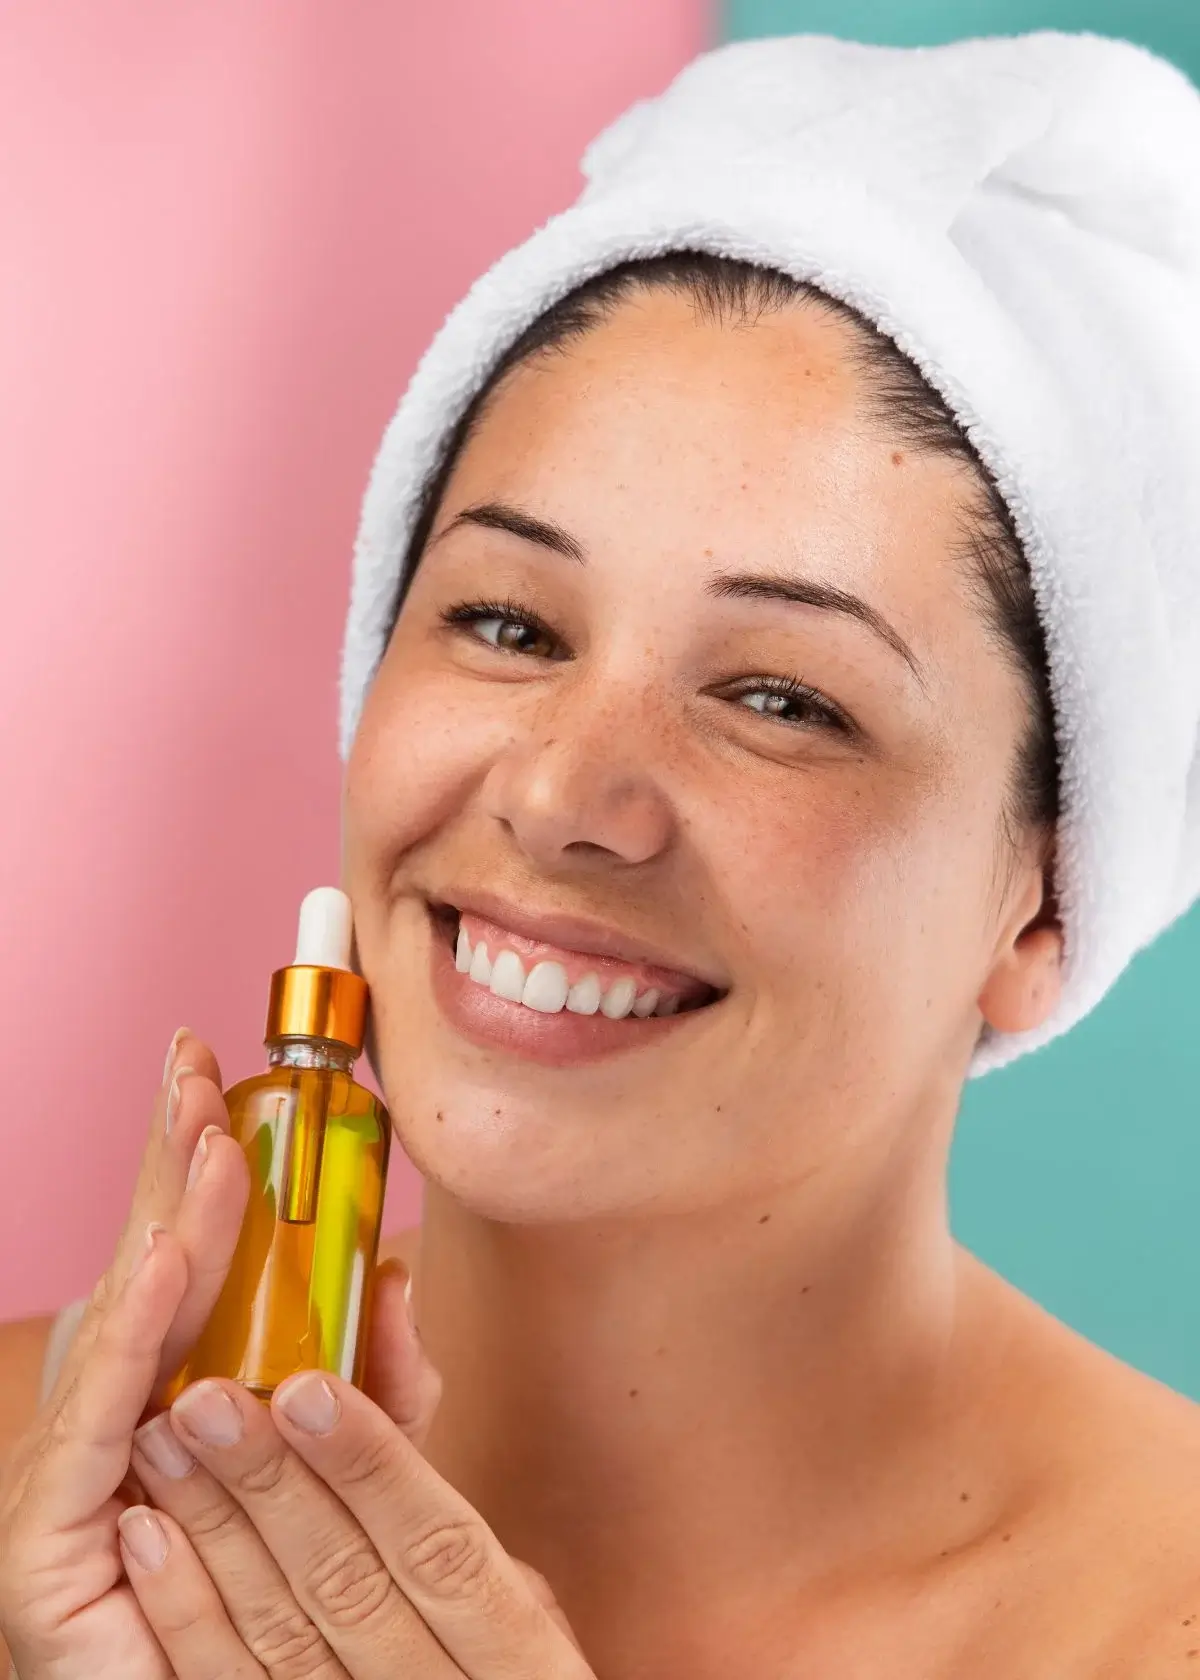 What are the benefits of using retinol for acne?